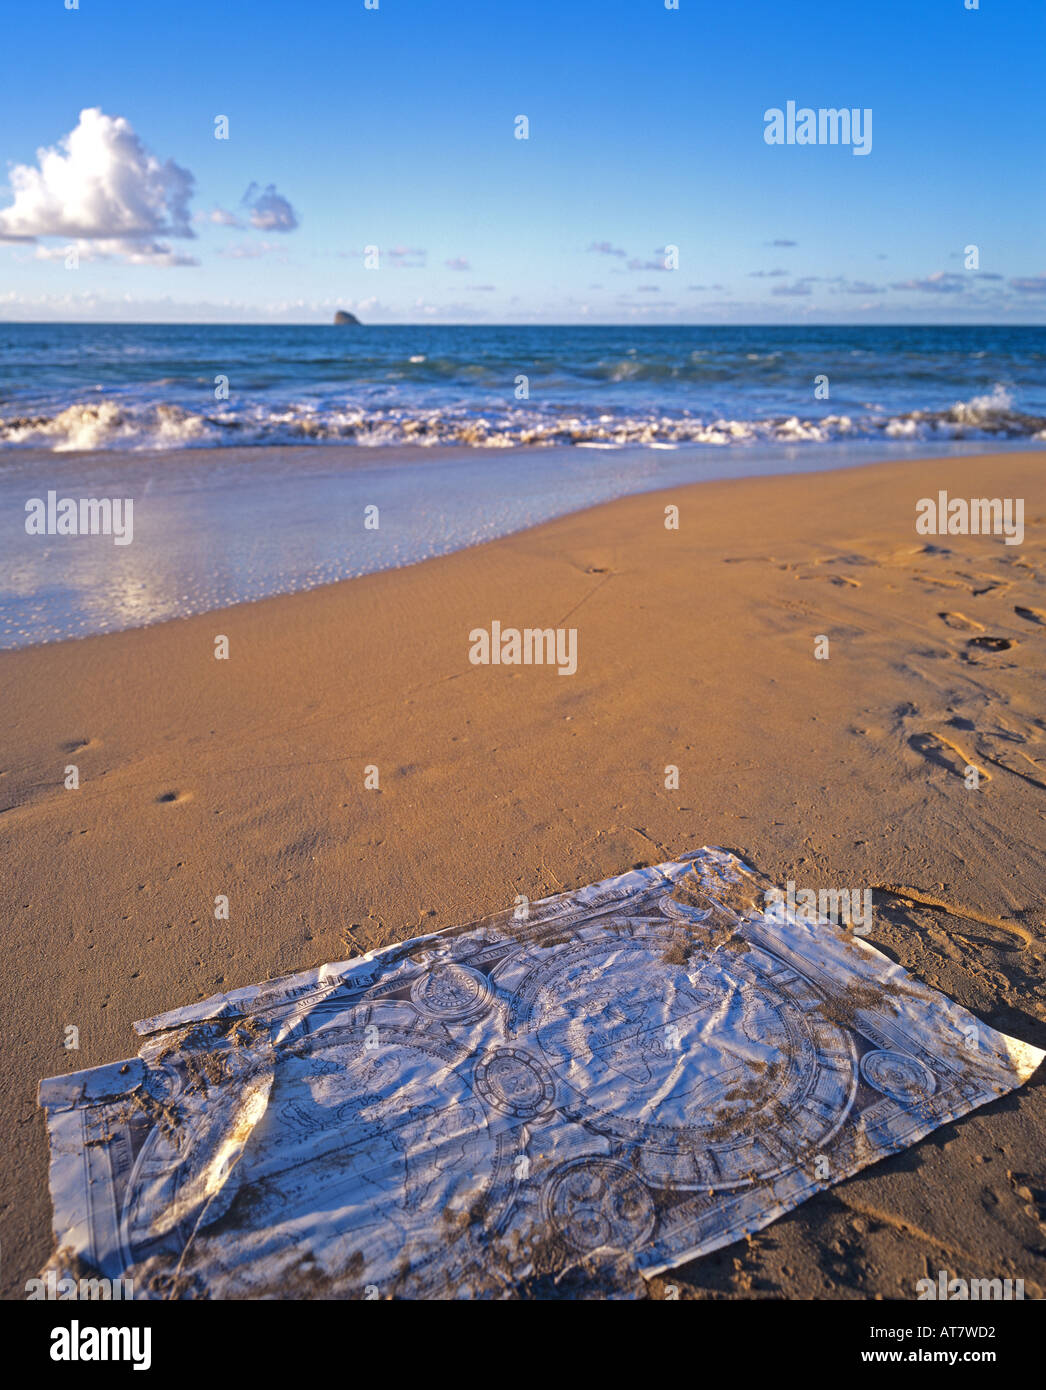 Ancient planisphere map on beach, Guadeloupe, French West Indies Stock Photo